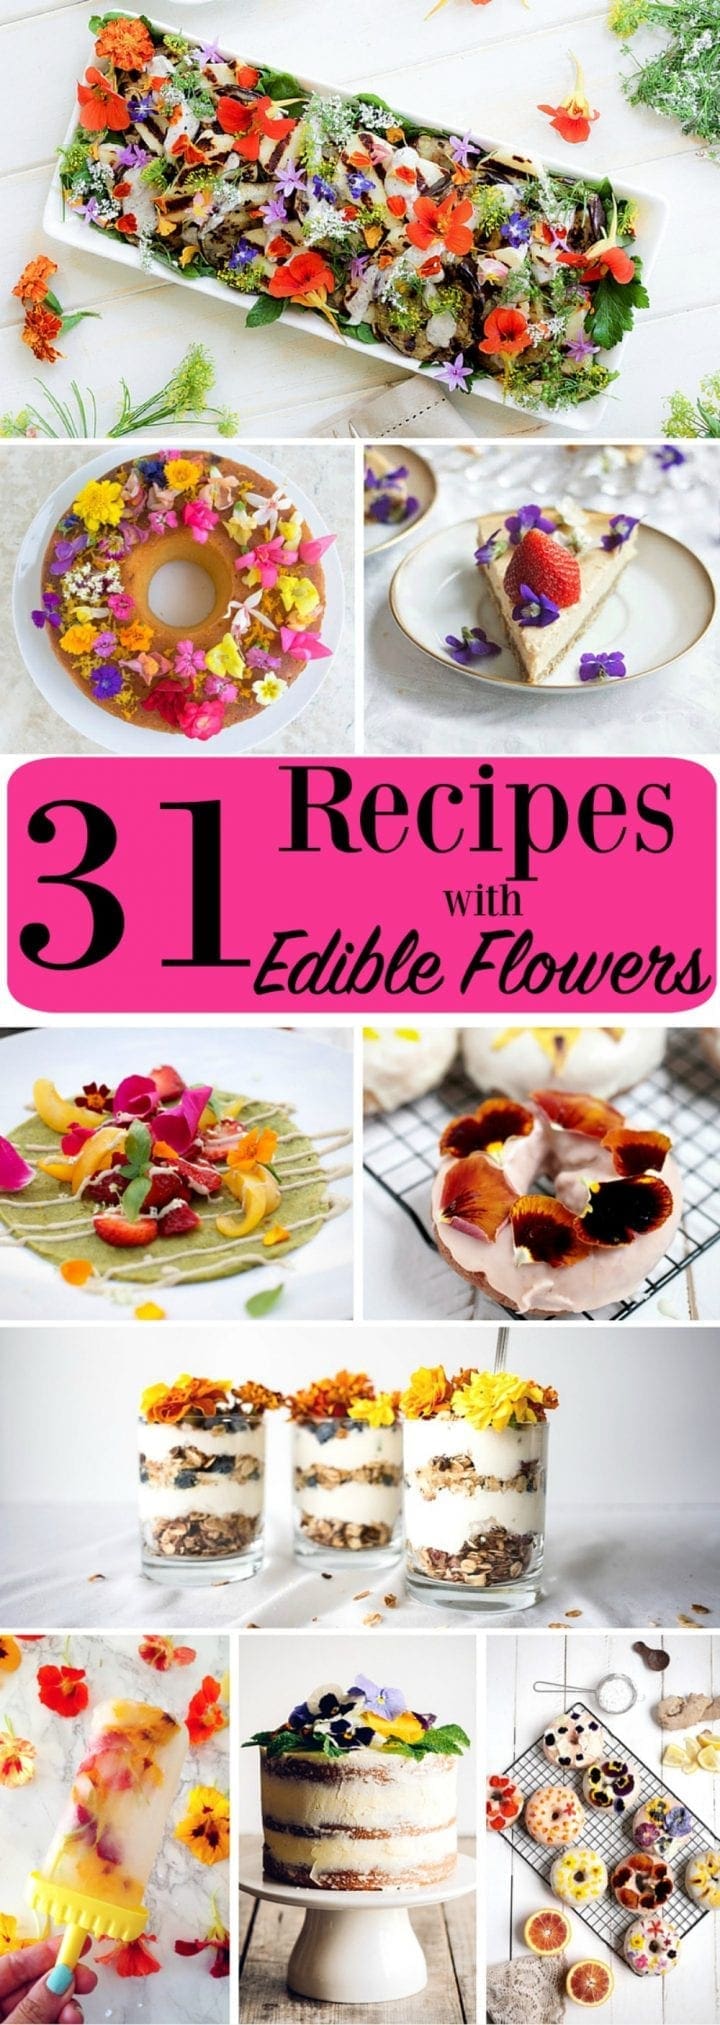 Recipes with Fresh Edible Flowers